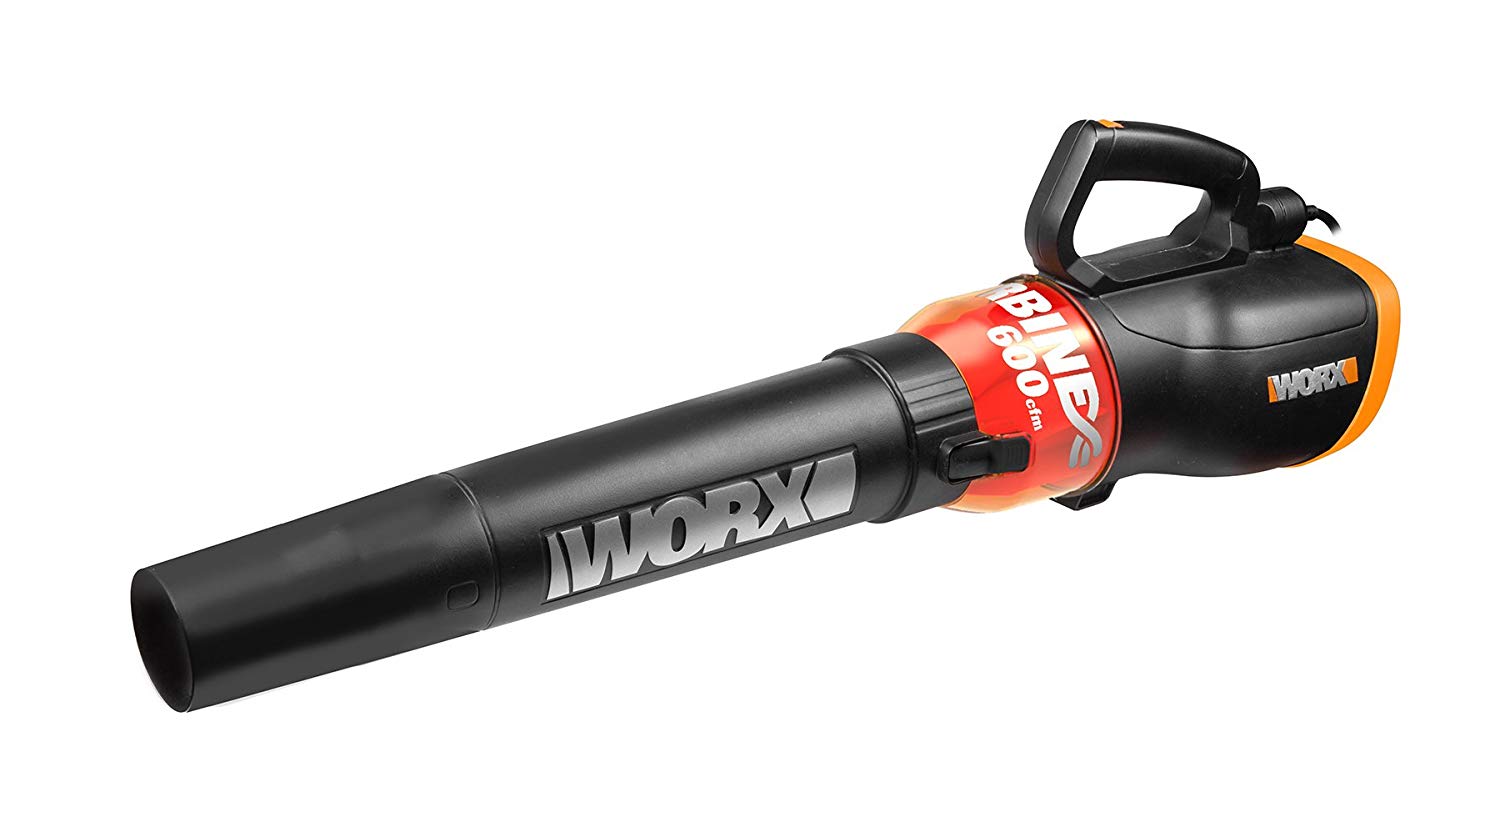 Worx TURBINE 12 Amp Corded Leaf Blower with 110 MPH and 600 CFM Output and Variable Speed Control – WG520